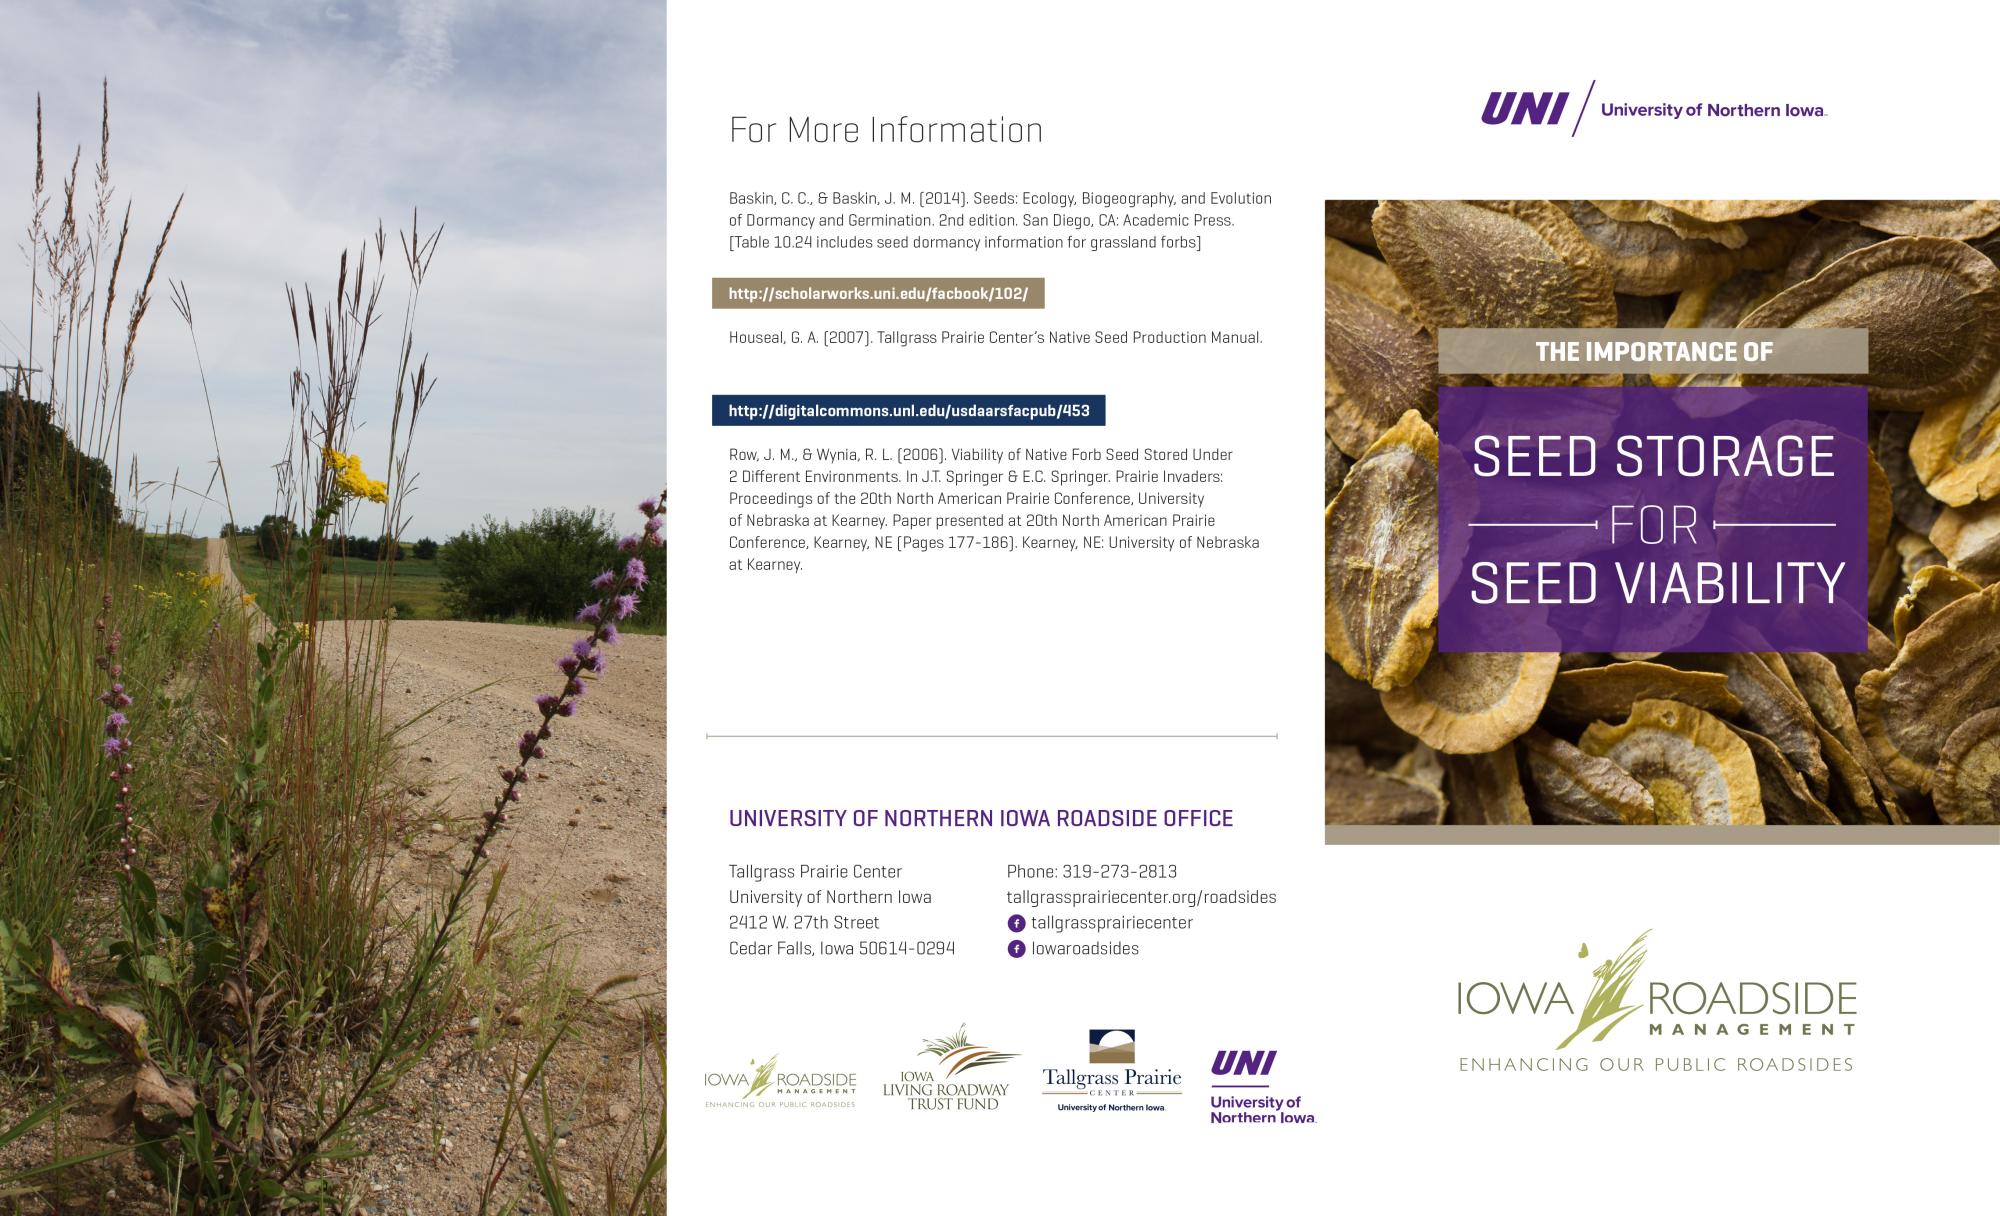 An image of the Seed Storage for Seed Viability brochure.